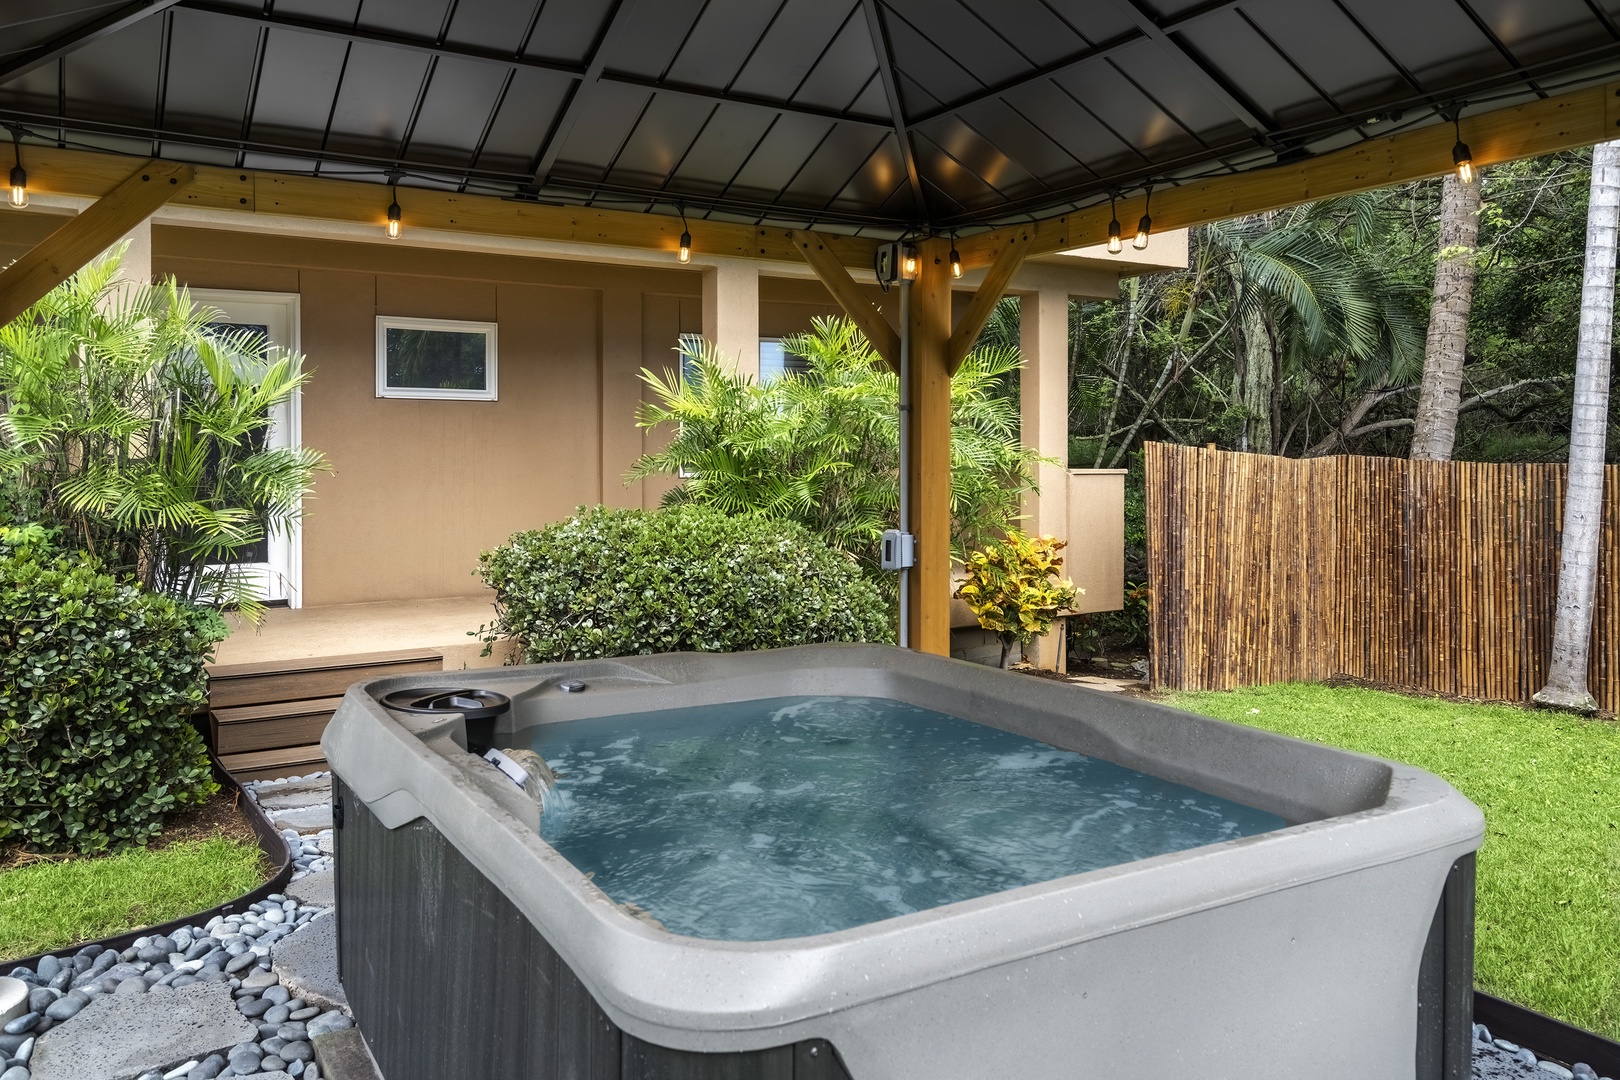 Kailua Kona Vacation Rentals, Lymans Bay Hale - Hot tub right out the door!